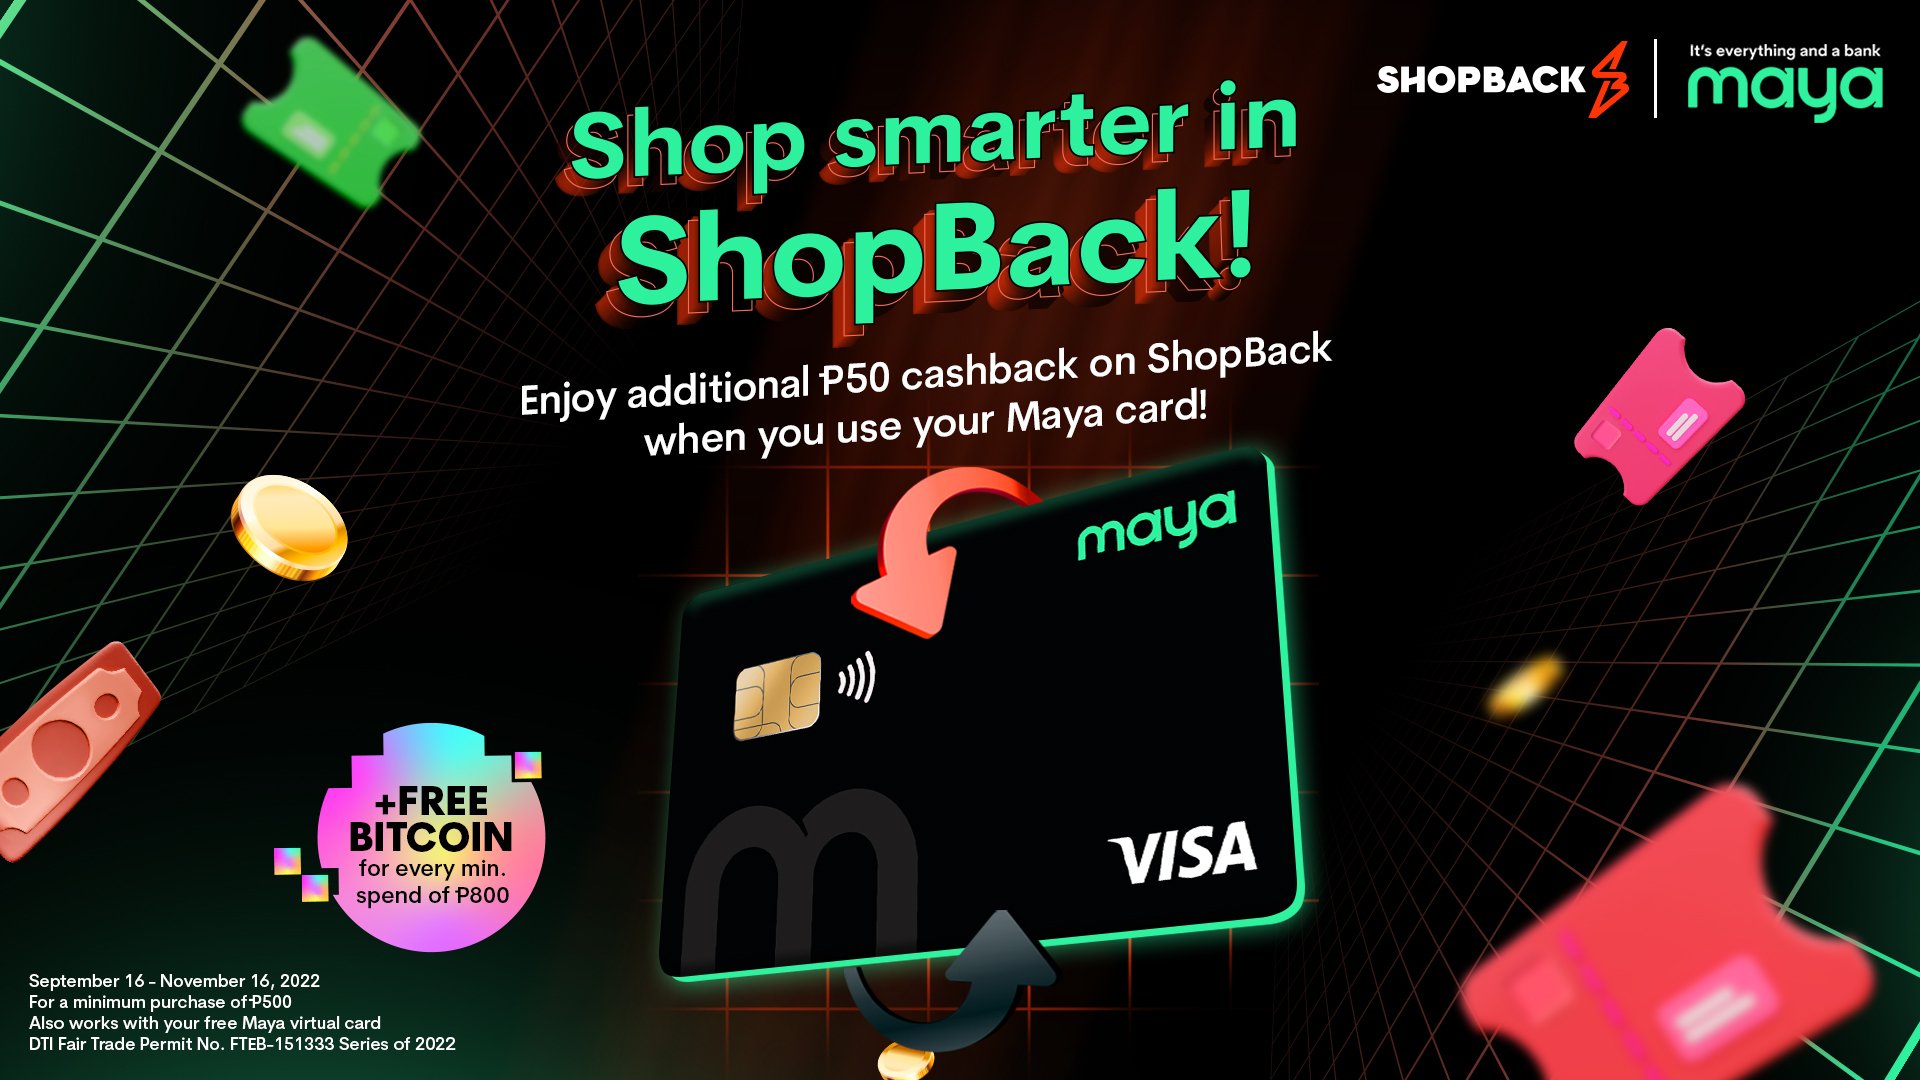 Get P50 back when you use your Maya card on Shopback!